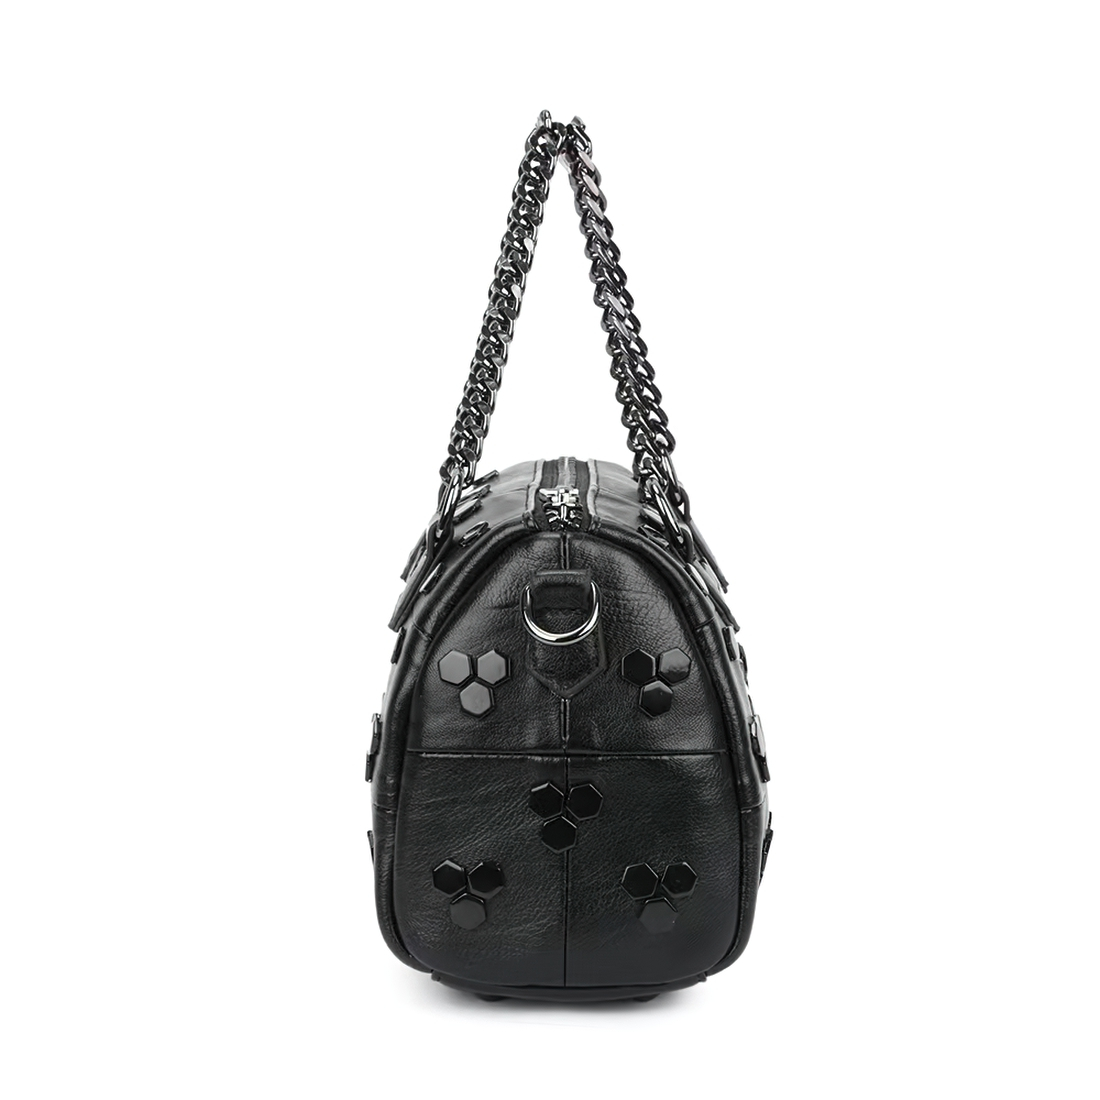 Punk Women's Bag with Rivets / Fashion Patchwork Handbag with Chain - HARD'N'HEAVY